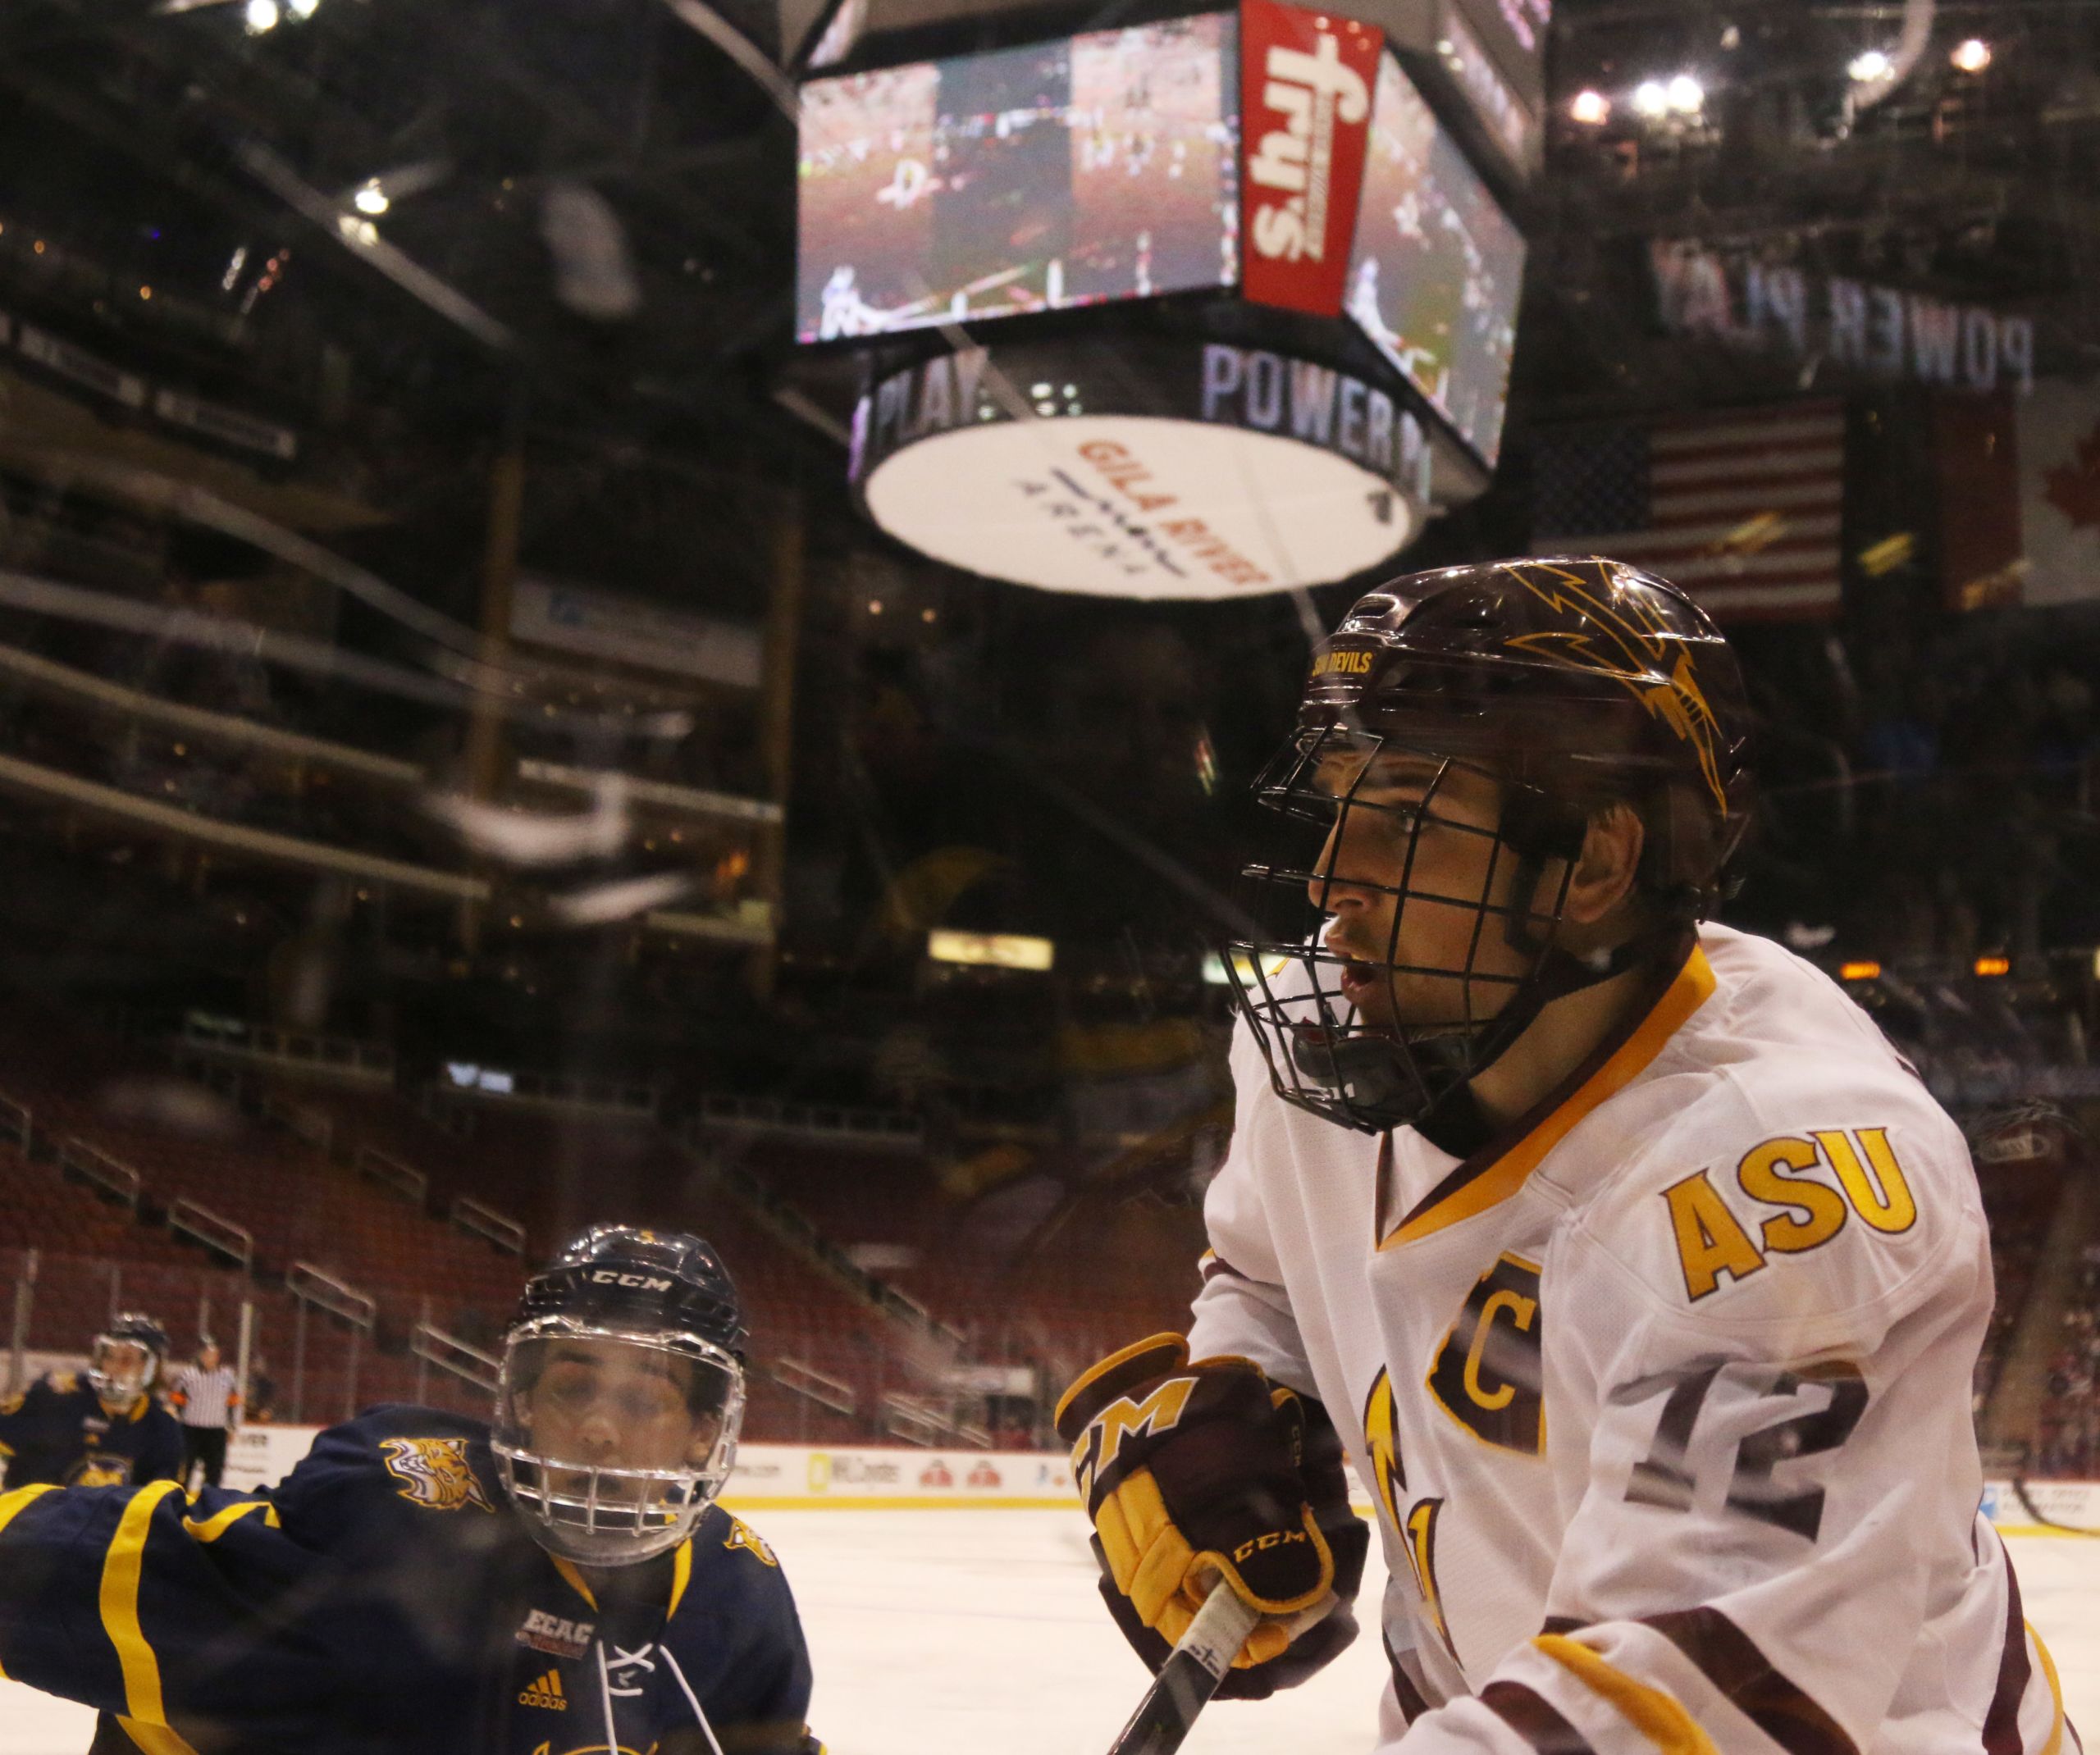 Why College Hockey Requires Players To Wear Full Cages